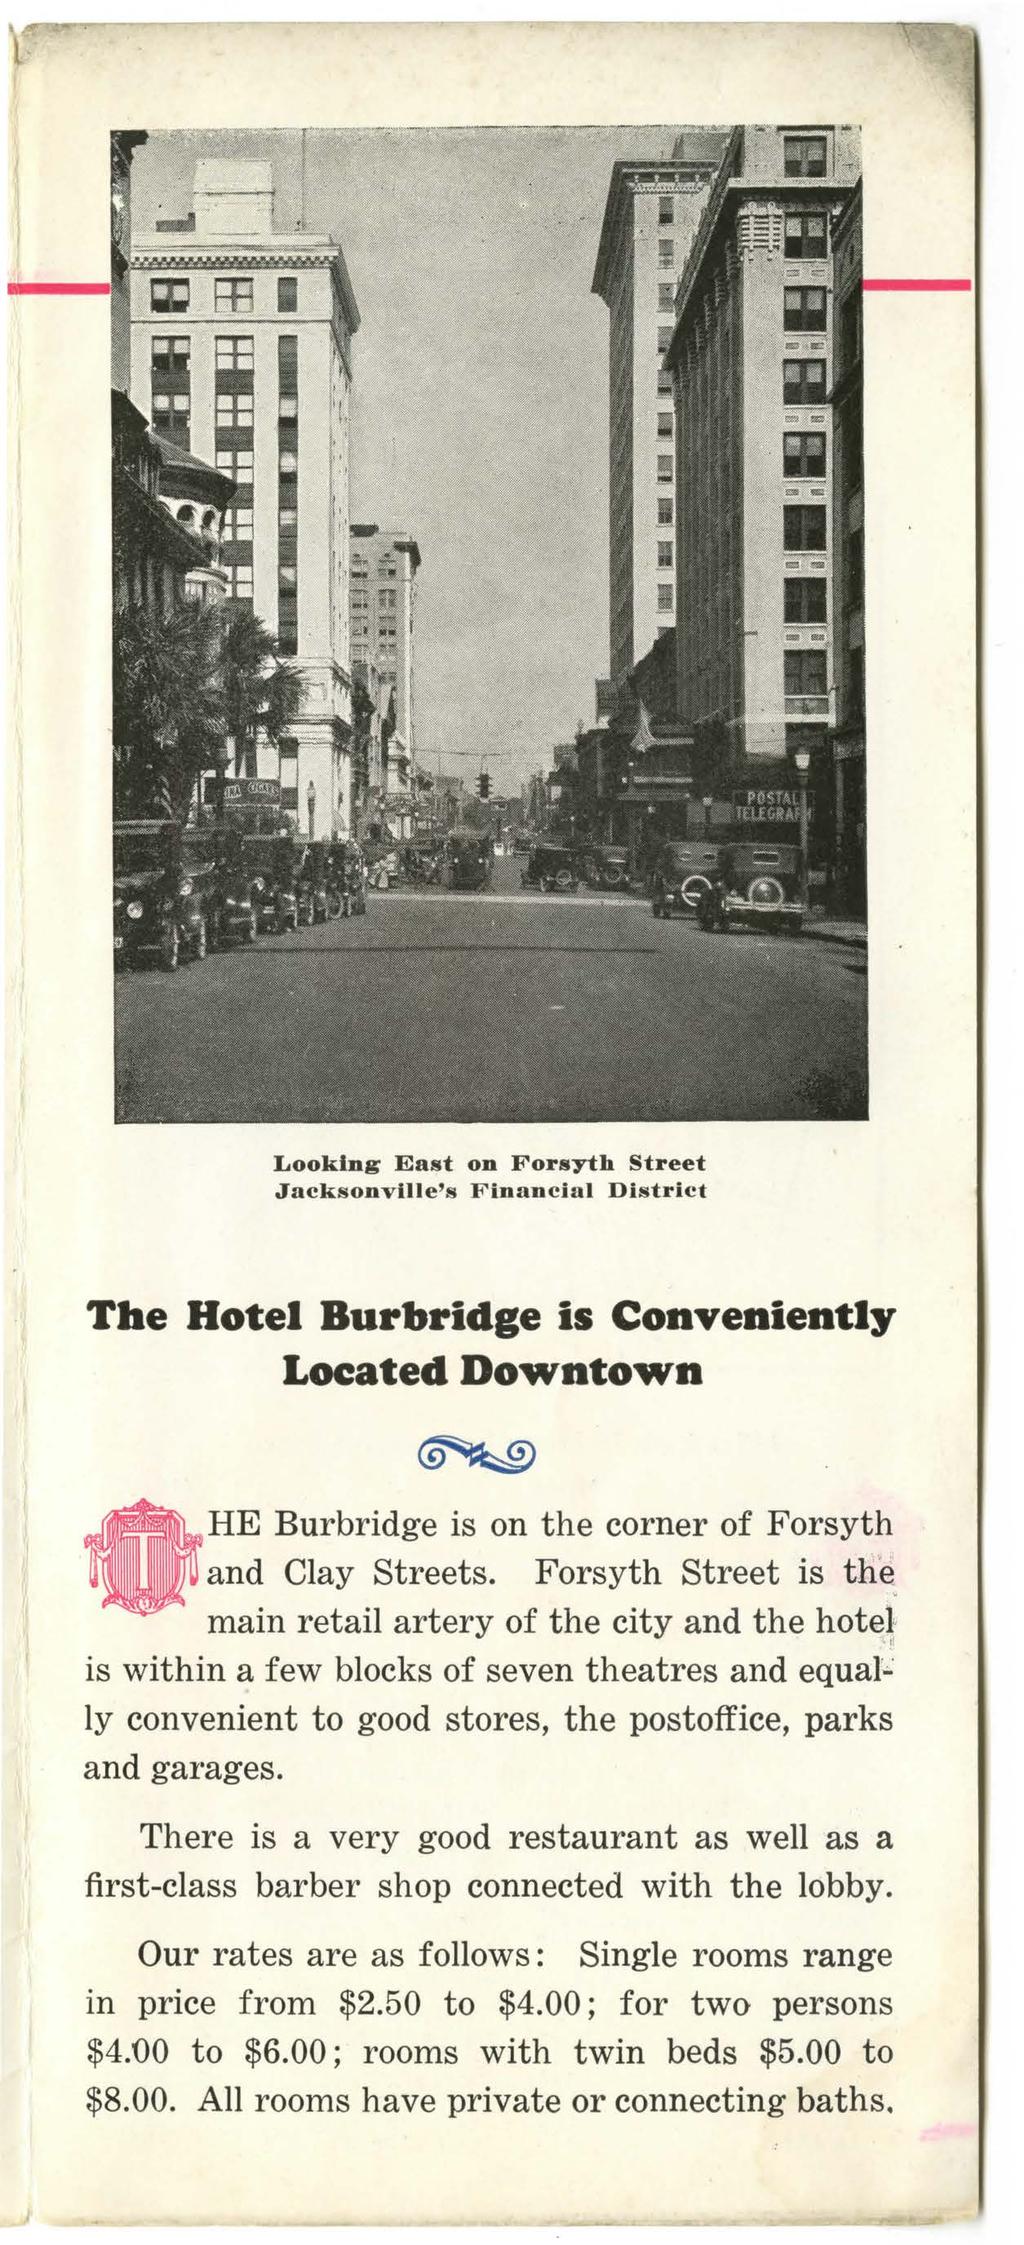 Looking East on Forsyth Street Jacksonvllle's Fin anclul District Tbe Hotel Burbridge is Conveniently Located Downtown HE Burbridge is on the corner of Forsyth and Clay Streets.